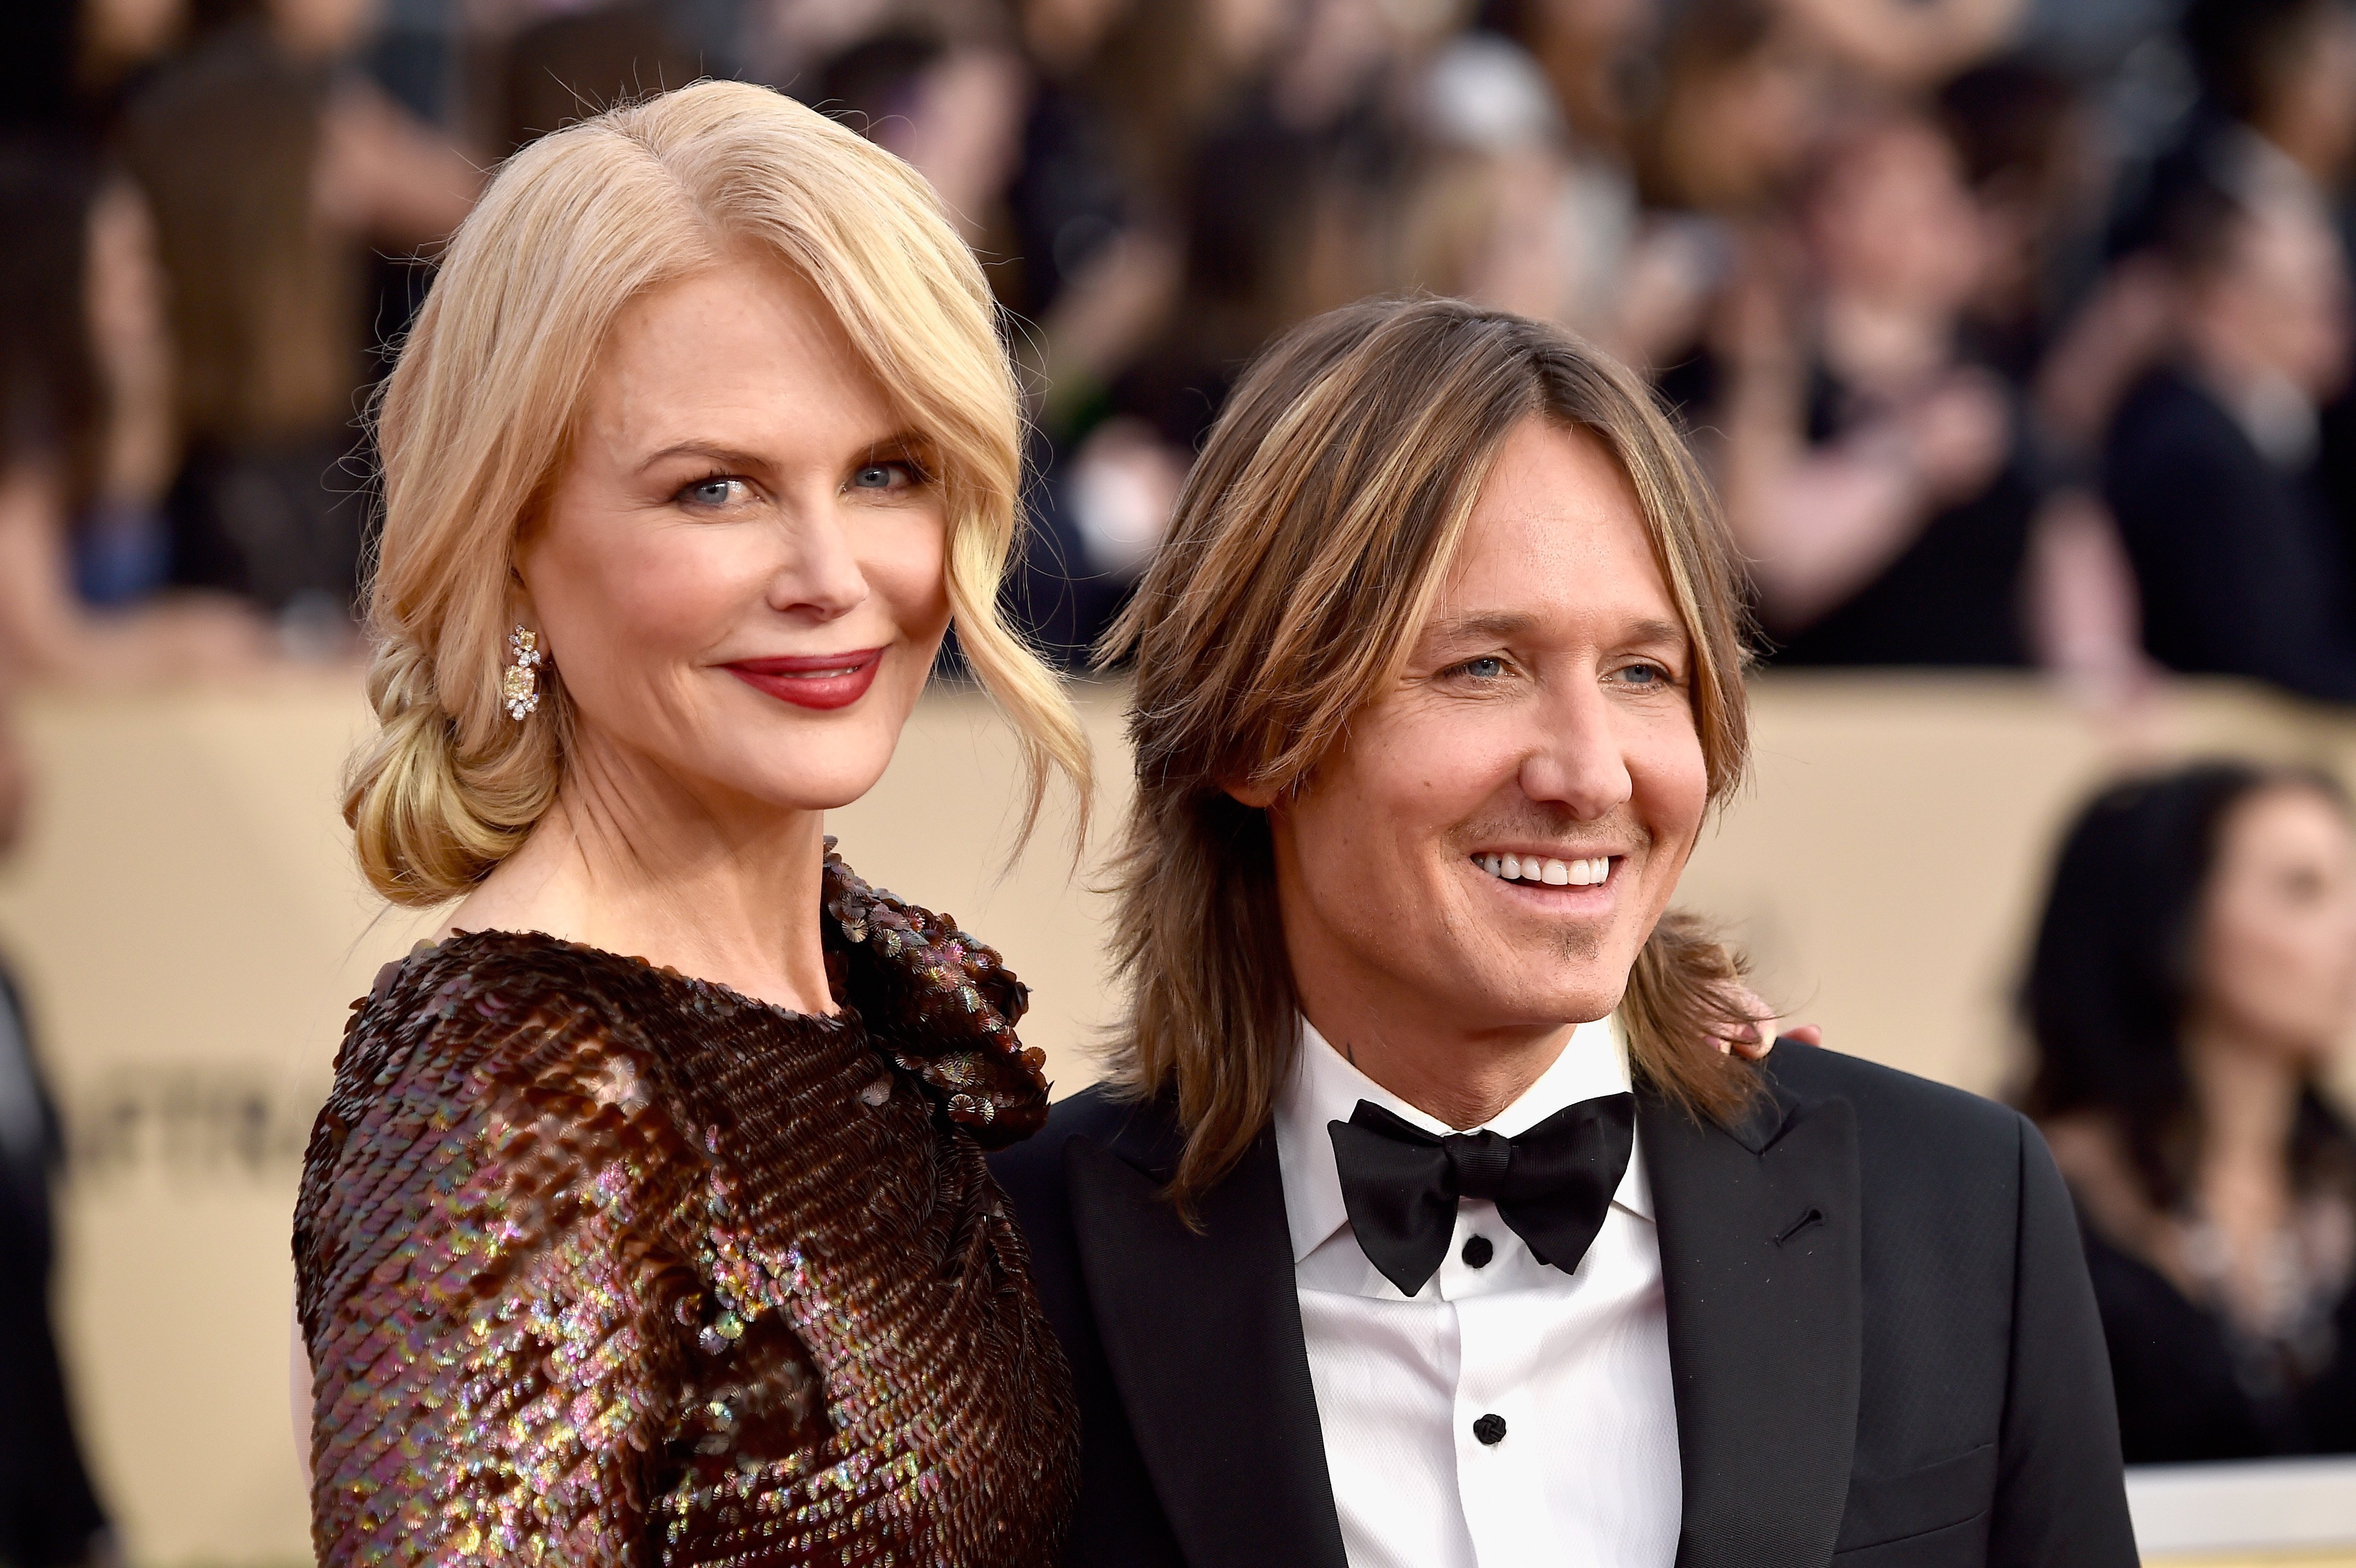 Nicole Kidman and Keith Urban attend the 24th Annual Screen Actors Guild Awards at The Shrine Auditorium on January 21, 2018 in Los Angeles, California | Photo: Getty Images